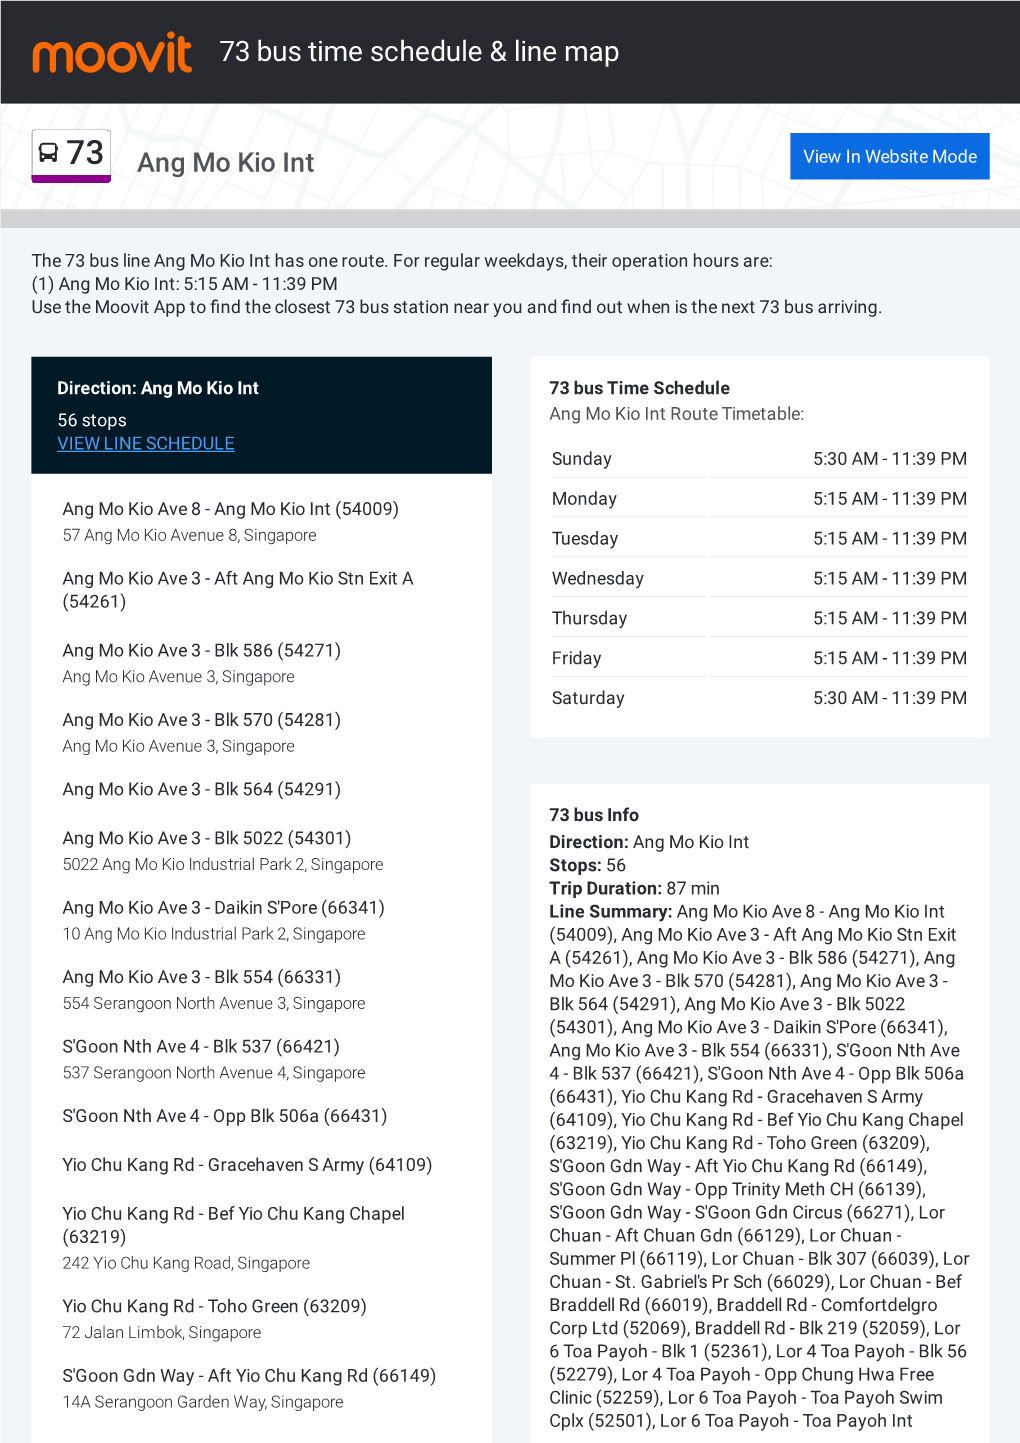 73 Bus Time Schedule & Line Route